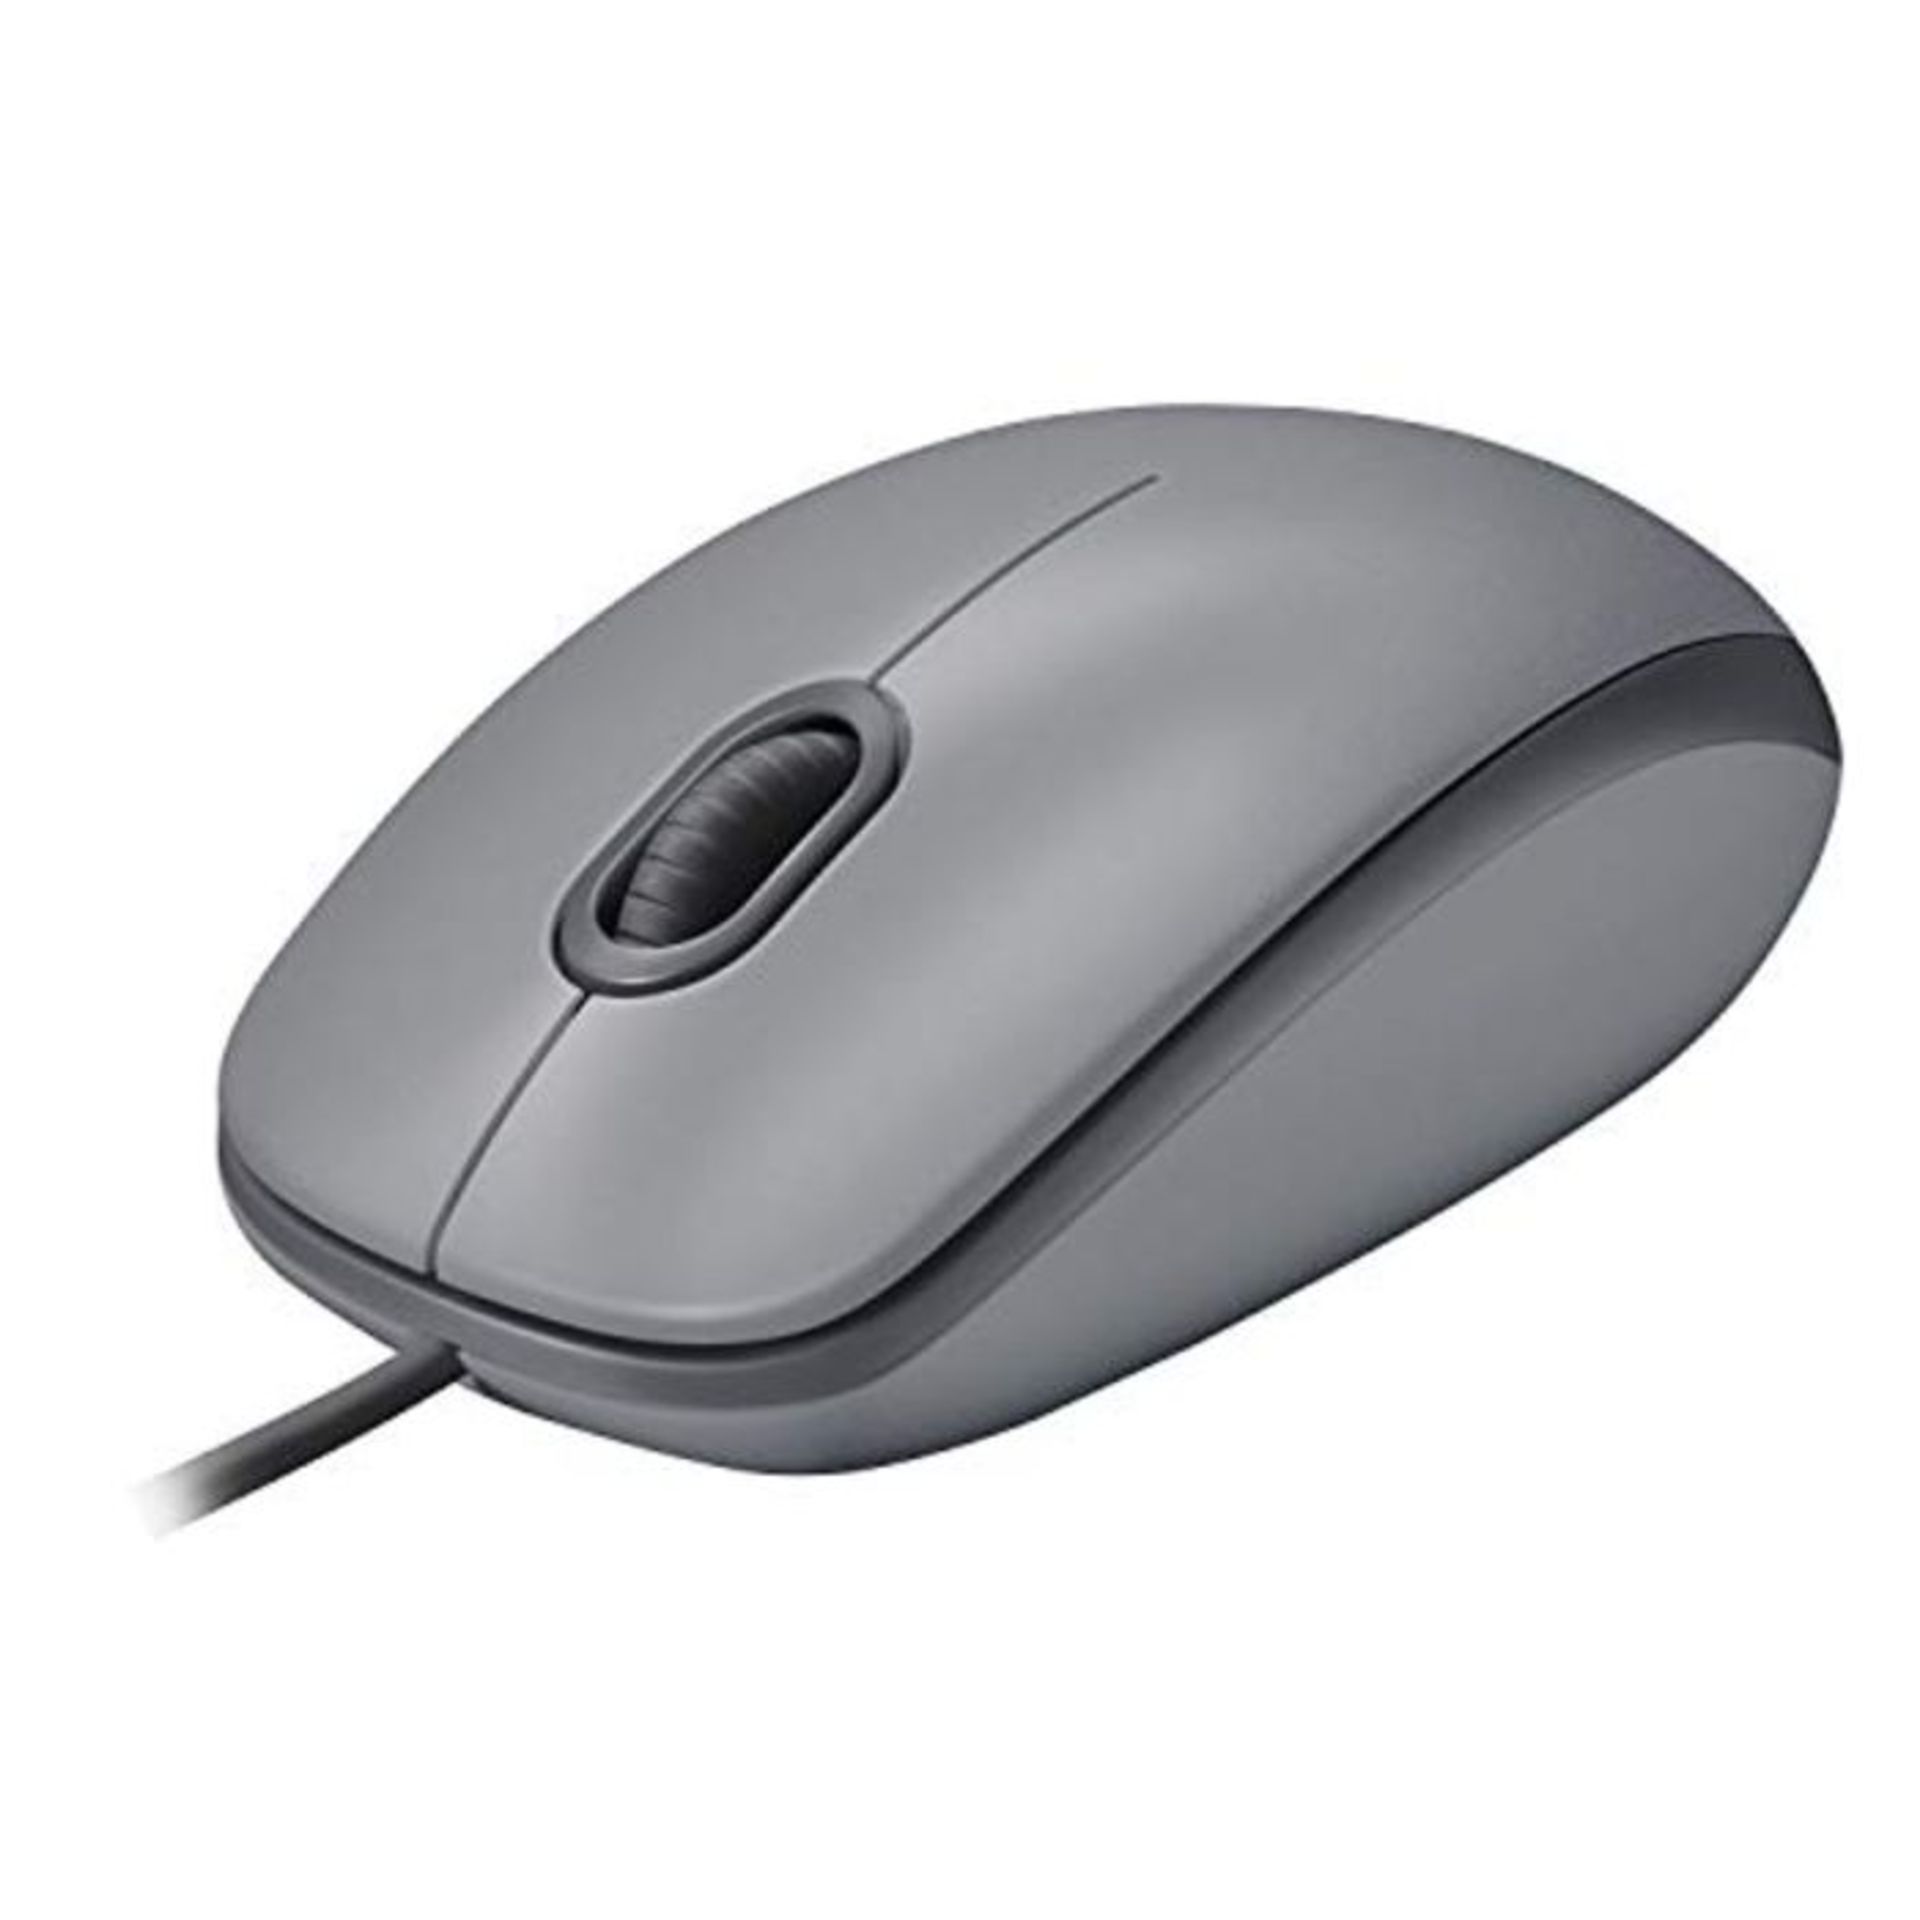 Logitech M110 Wired USB Mouse, Silent Buttons, Comfortable Full-Size Use Design, Ambid